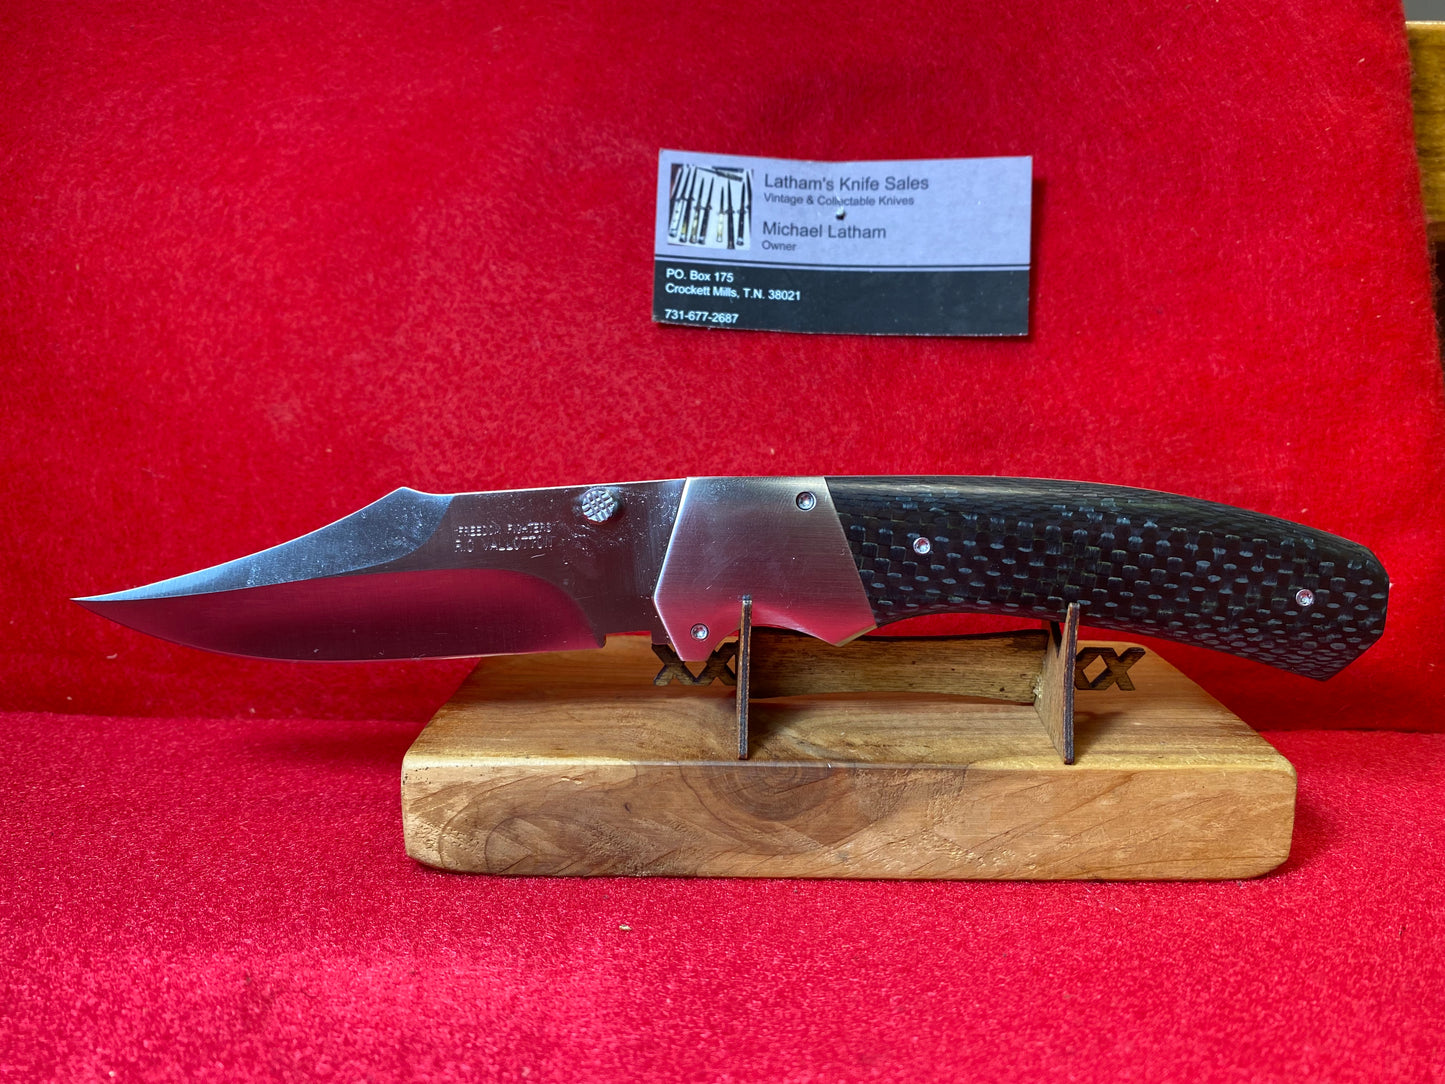 VALLOTTON, R.C.  "FREEDOM FIGHTERS" 2018-20 CUSTOM AUTOMATIC KNIFE DOUBLE ACTION SCALE RELEASE CARBON FIBER HANDLES